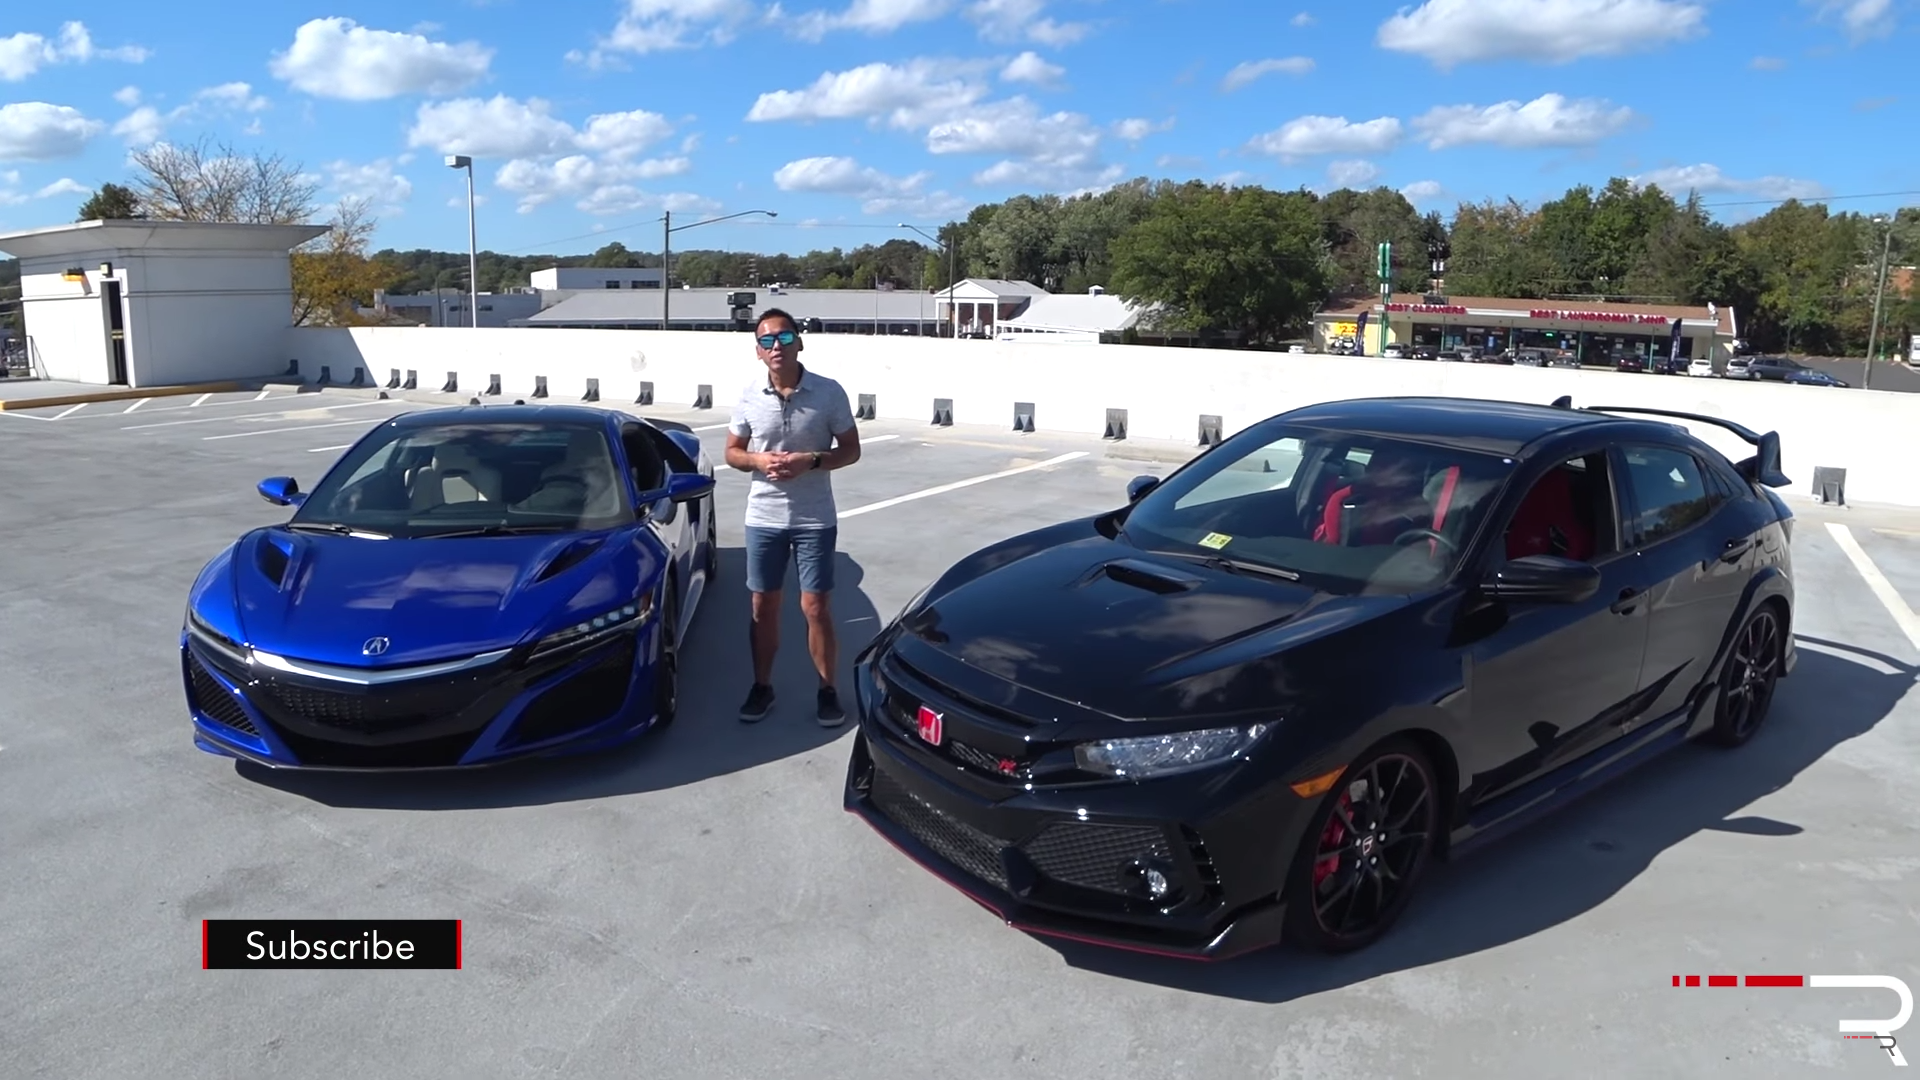 Civic Type R and Acura NSX